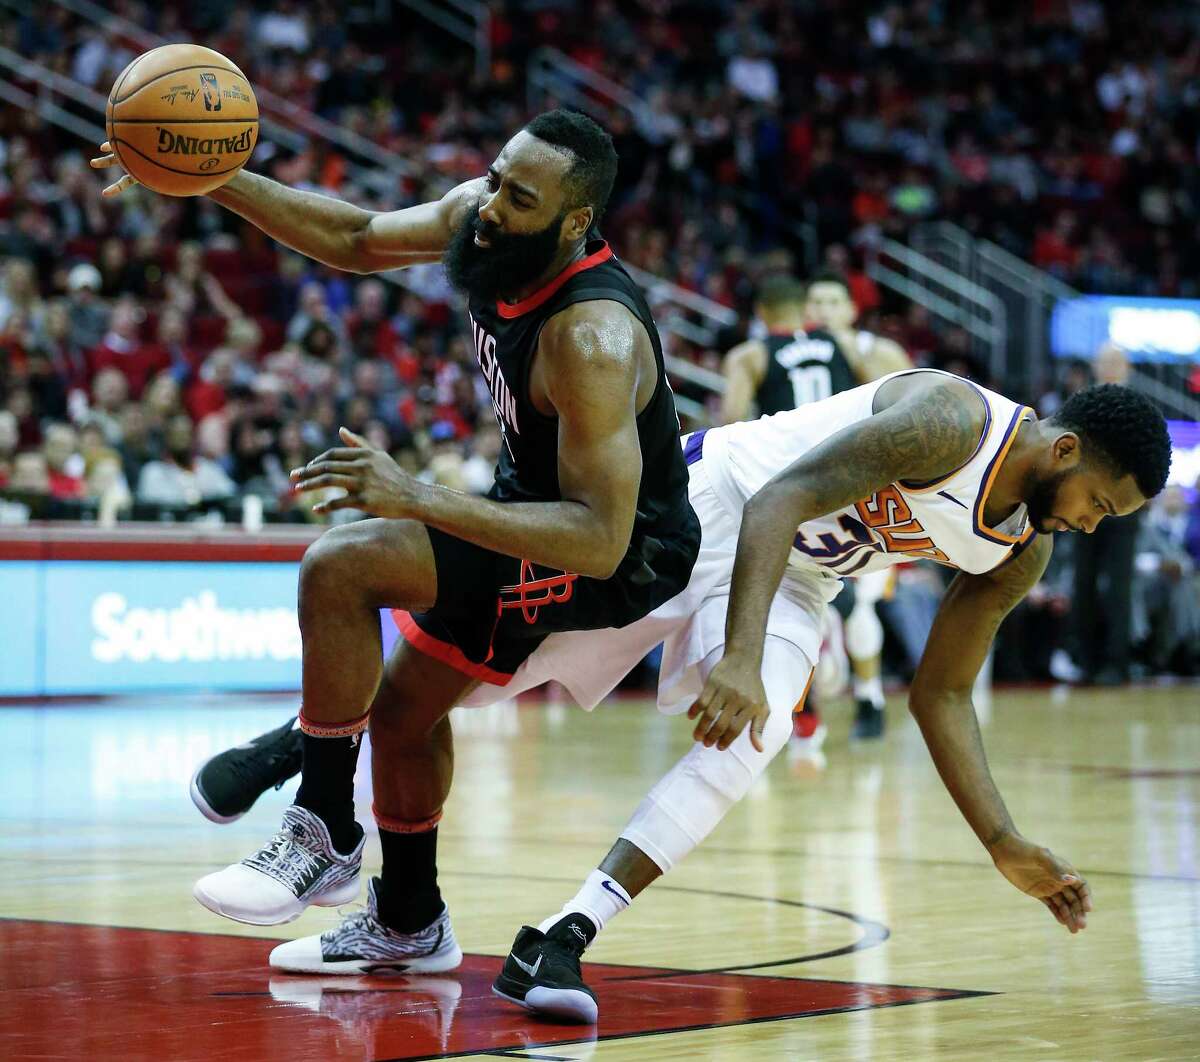 Houston Rockets guard James Harden (13) and Phoenix Suns guard Troy Daniels (30) collide on a pass to Harden during the second quarter of an NBA basketball game at Toyota Center on Sunday, Jan. 28, 2018, in Houston. ( Brett Coomer / Houston Chronicle )